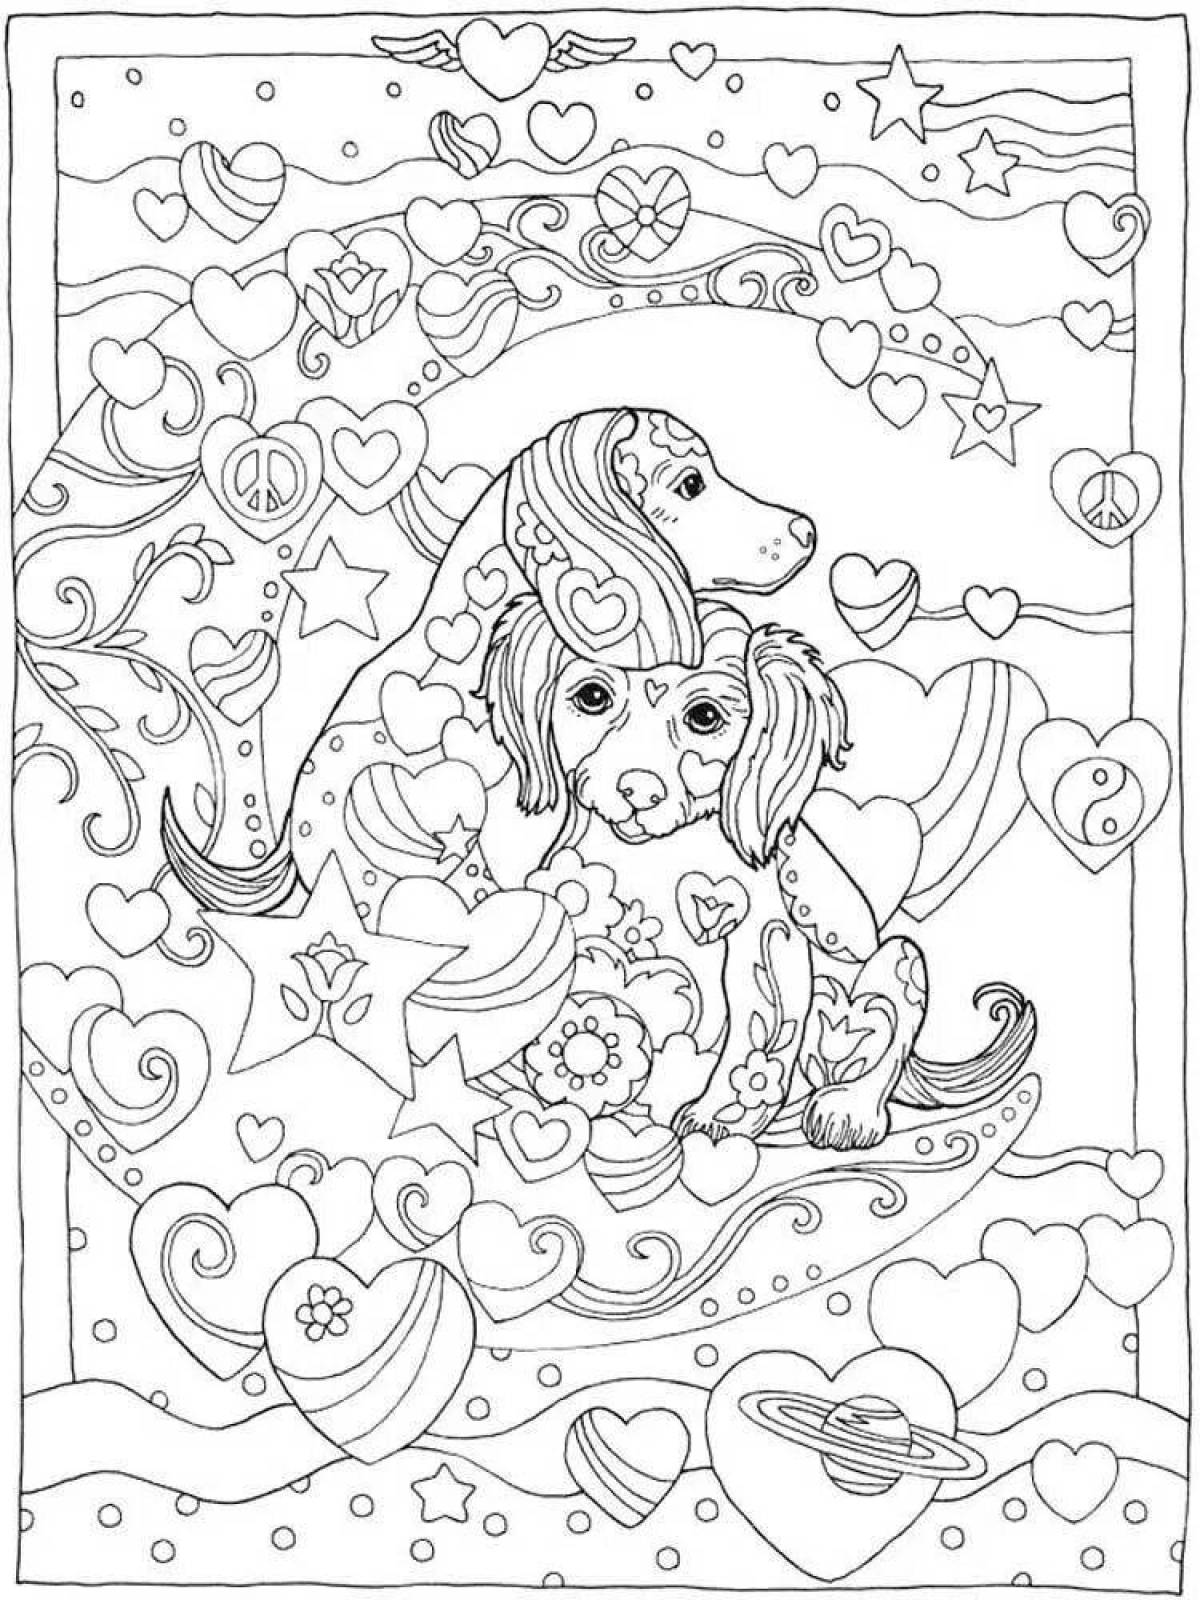 Loving dog coloring pages for adults